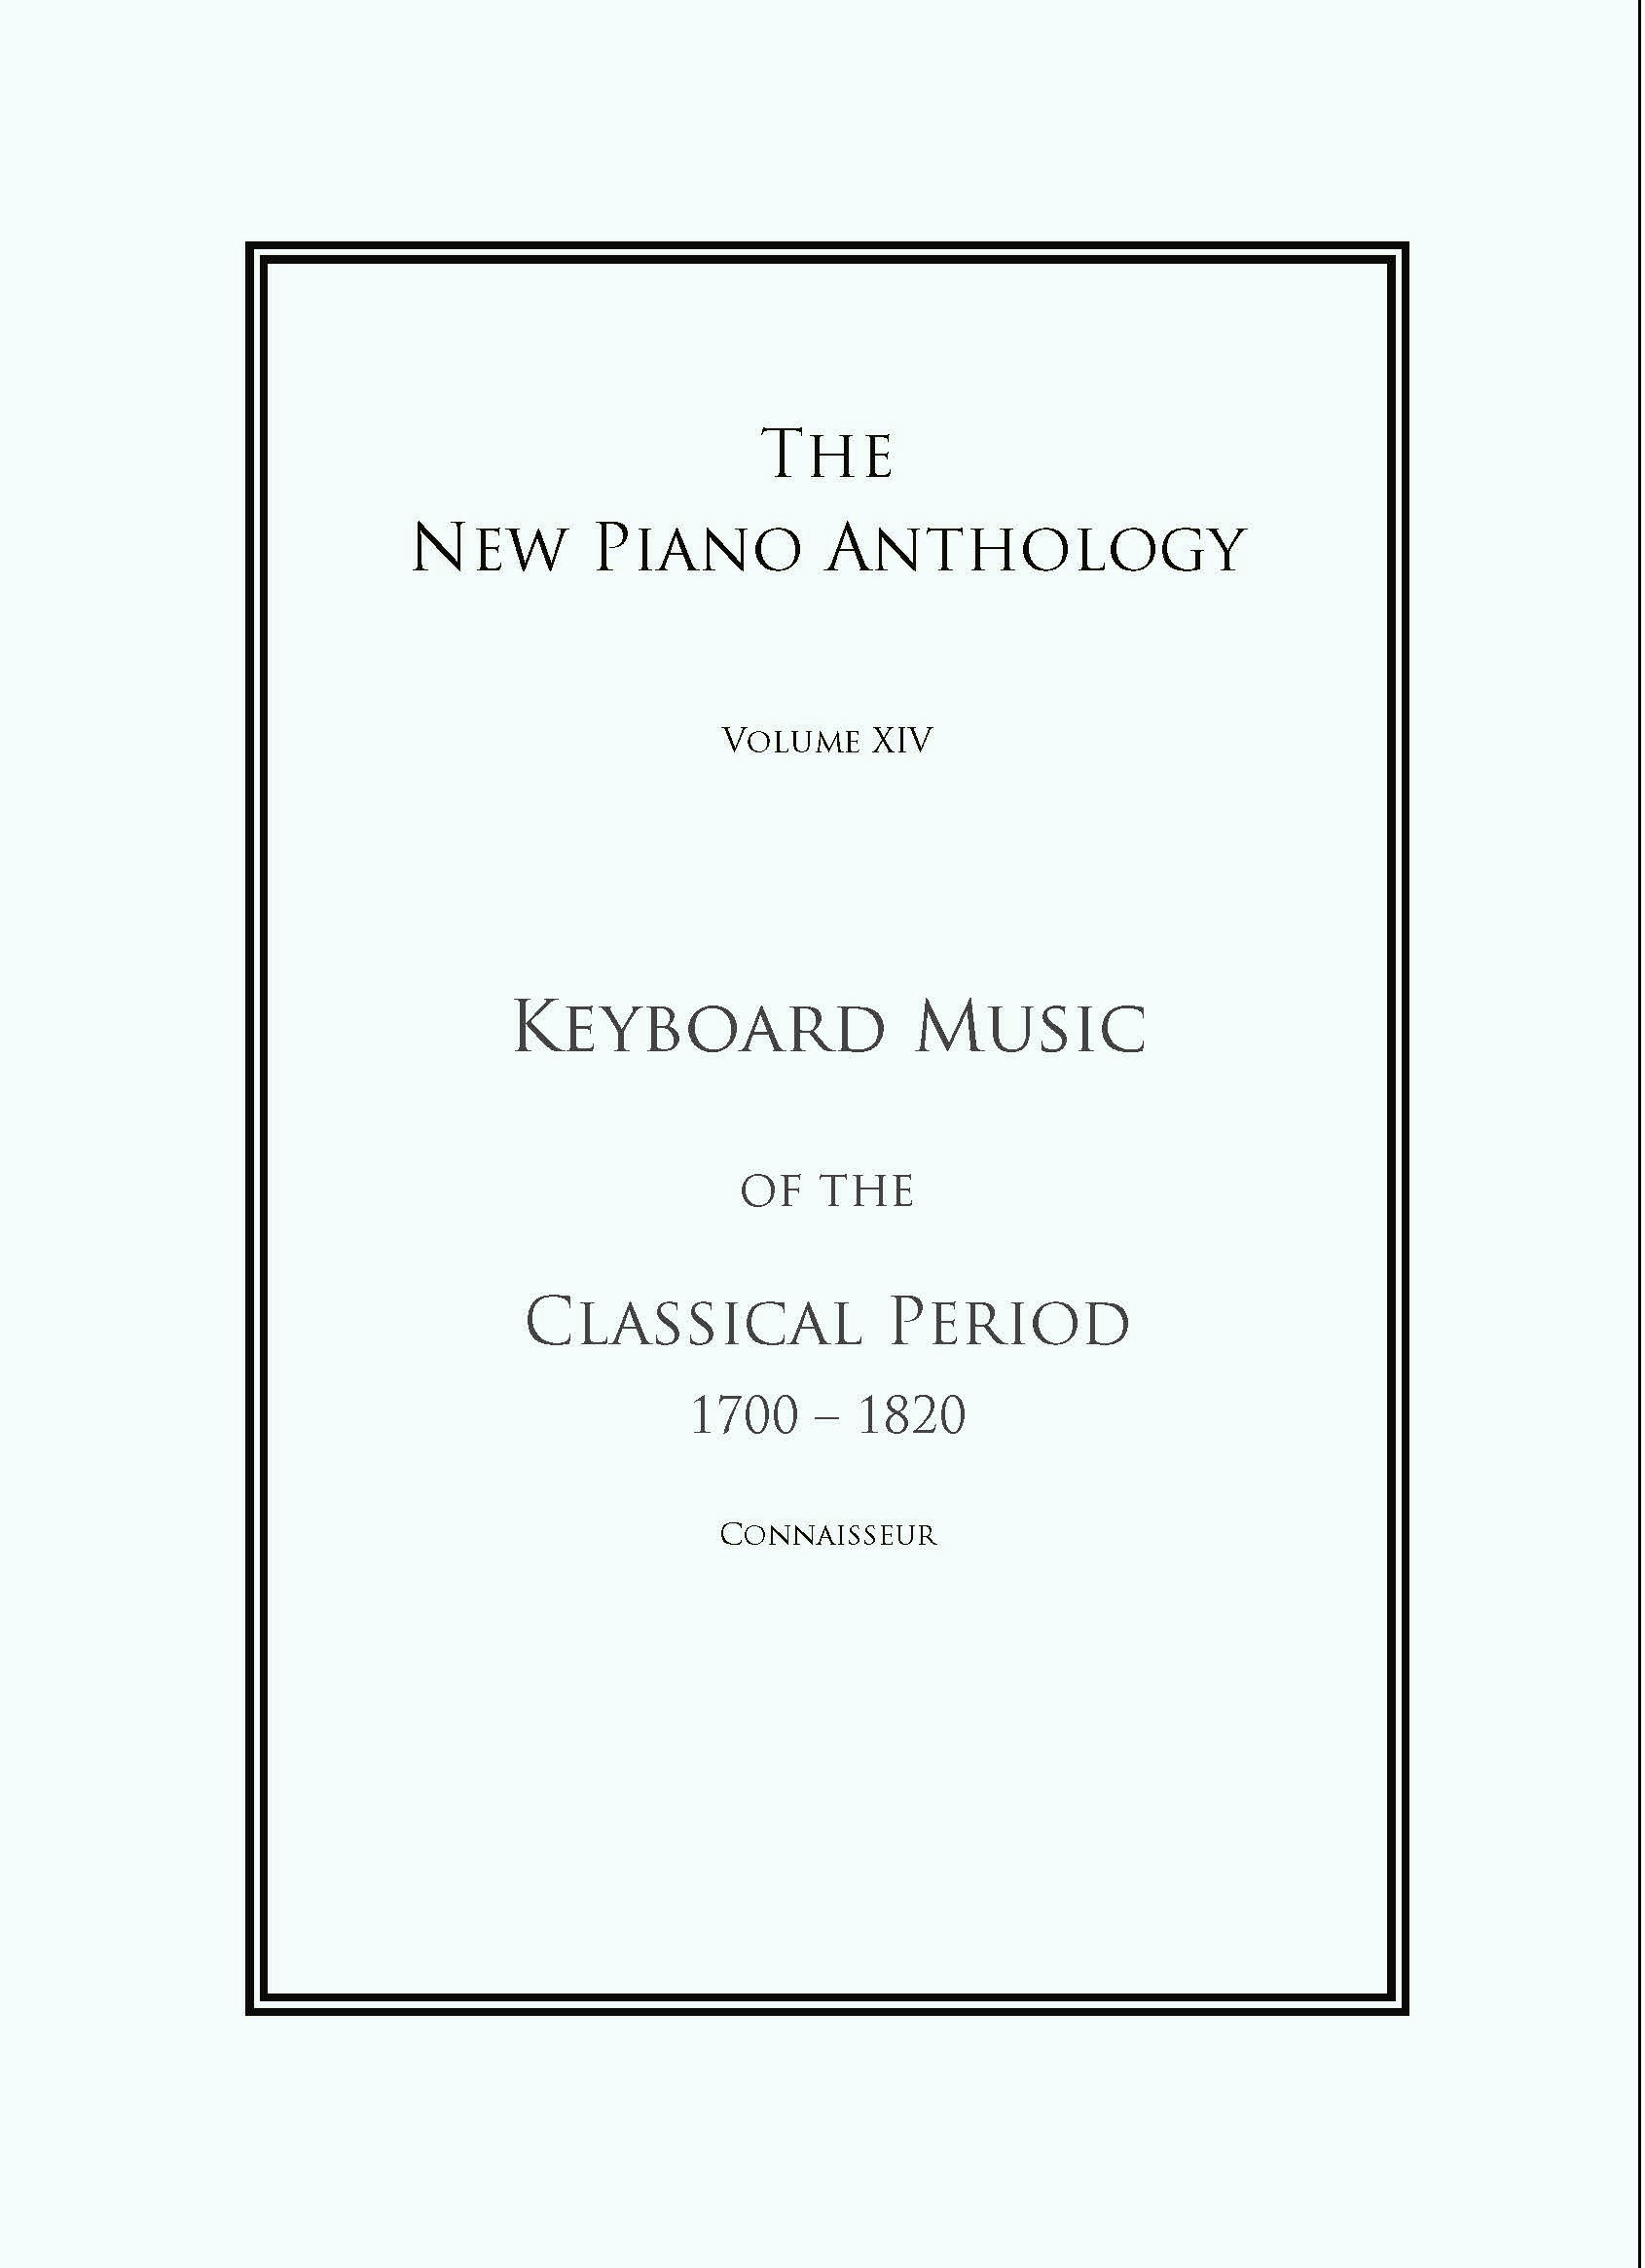 Keyboard Music of the Classical Period 1700 - 1820 (Connoisseur)